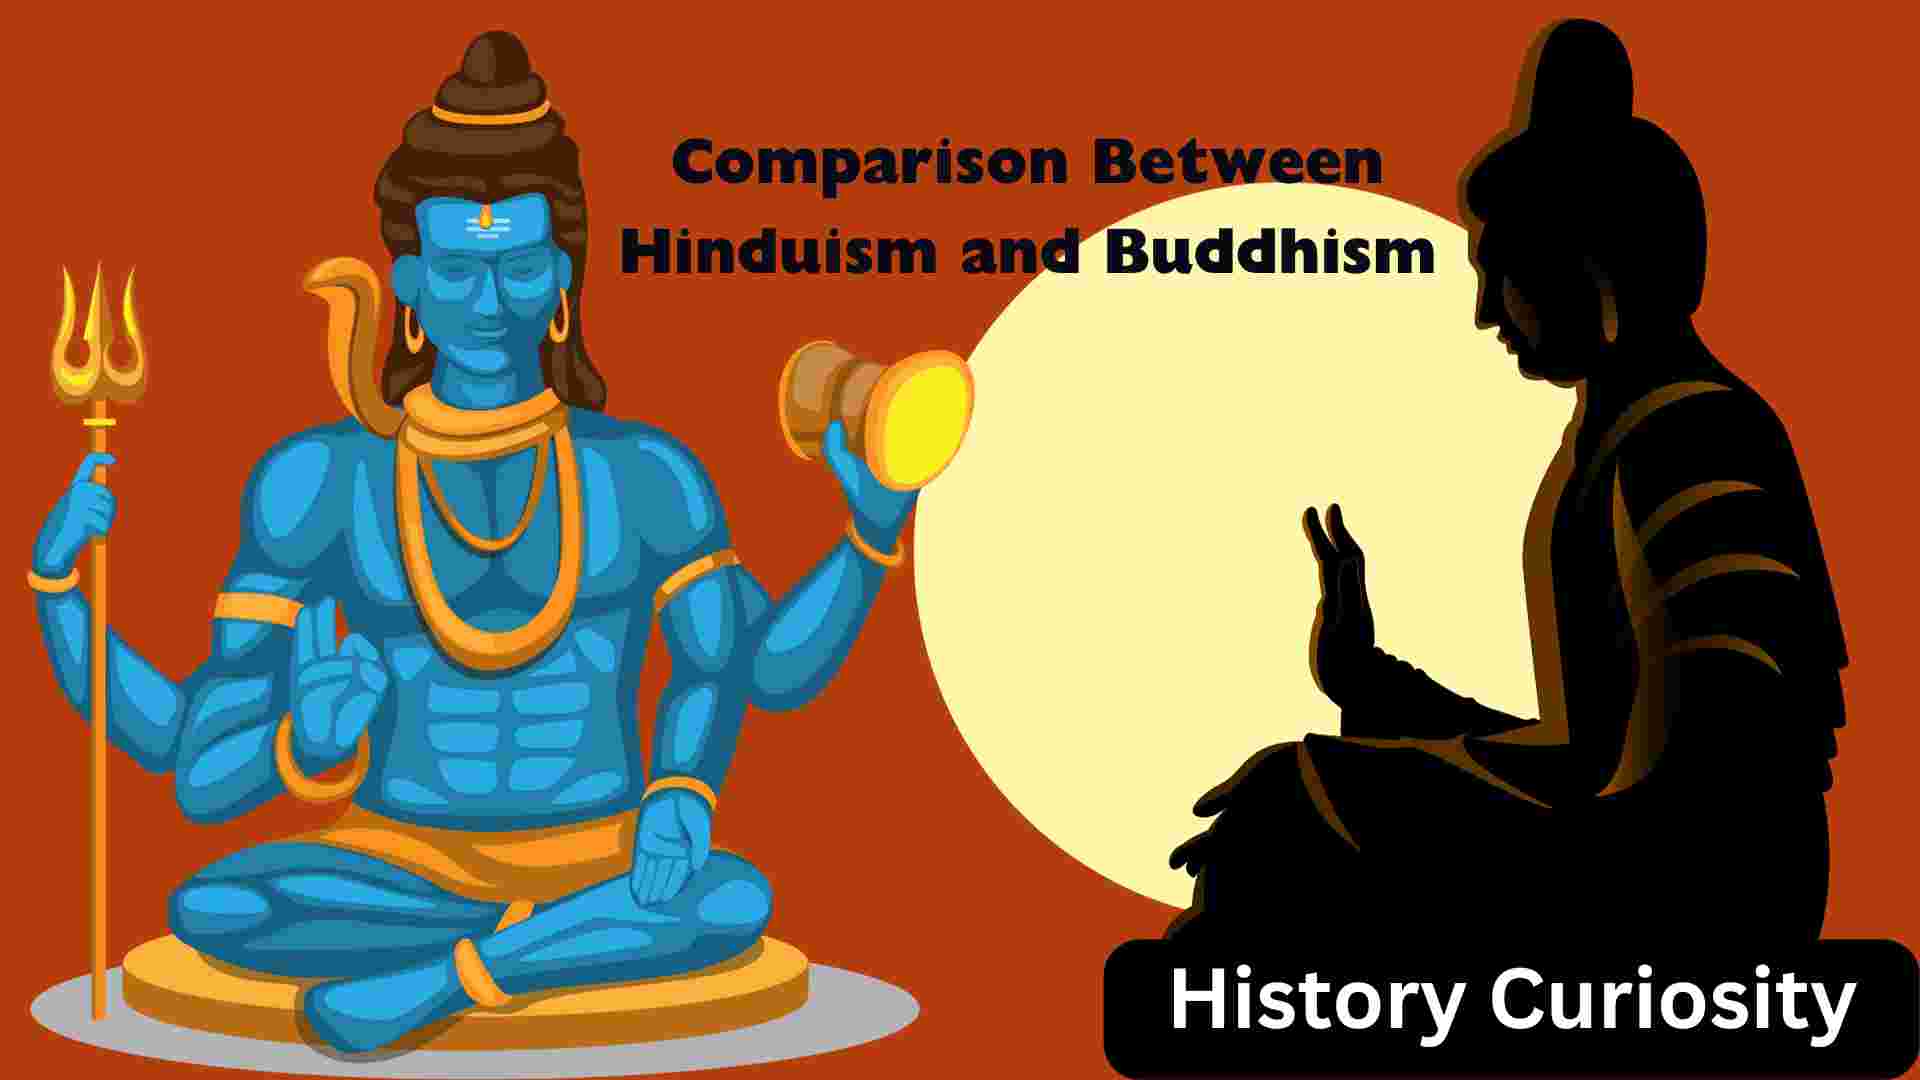 Comparison Between Hinduism and Buddhism